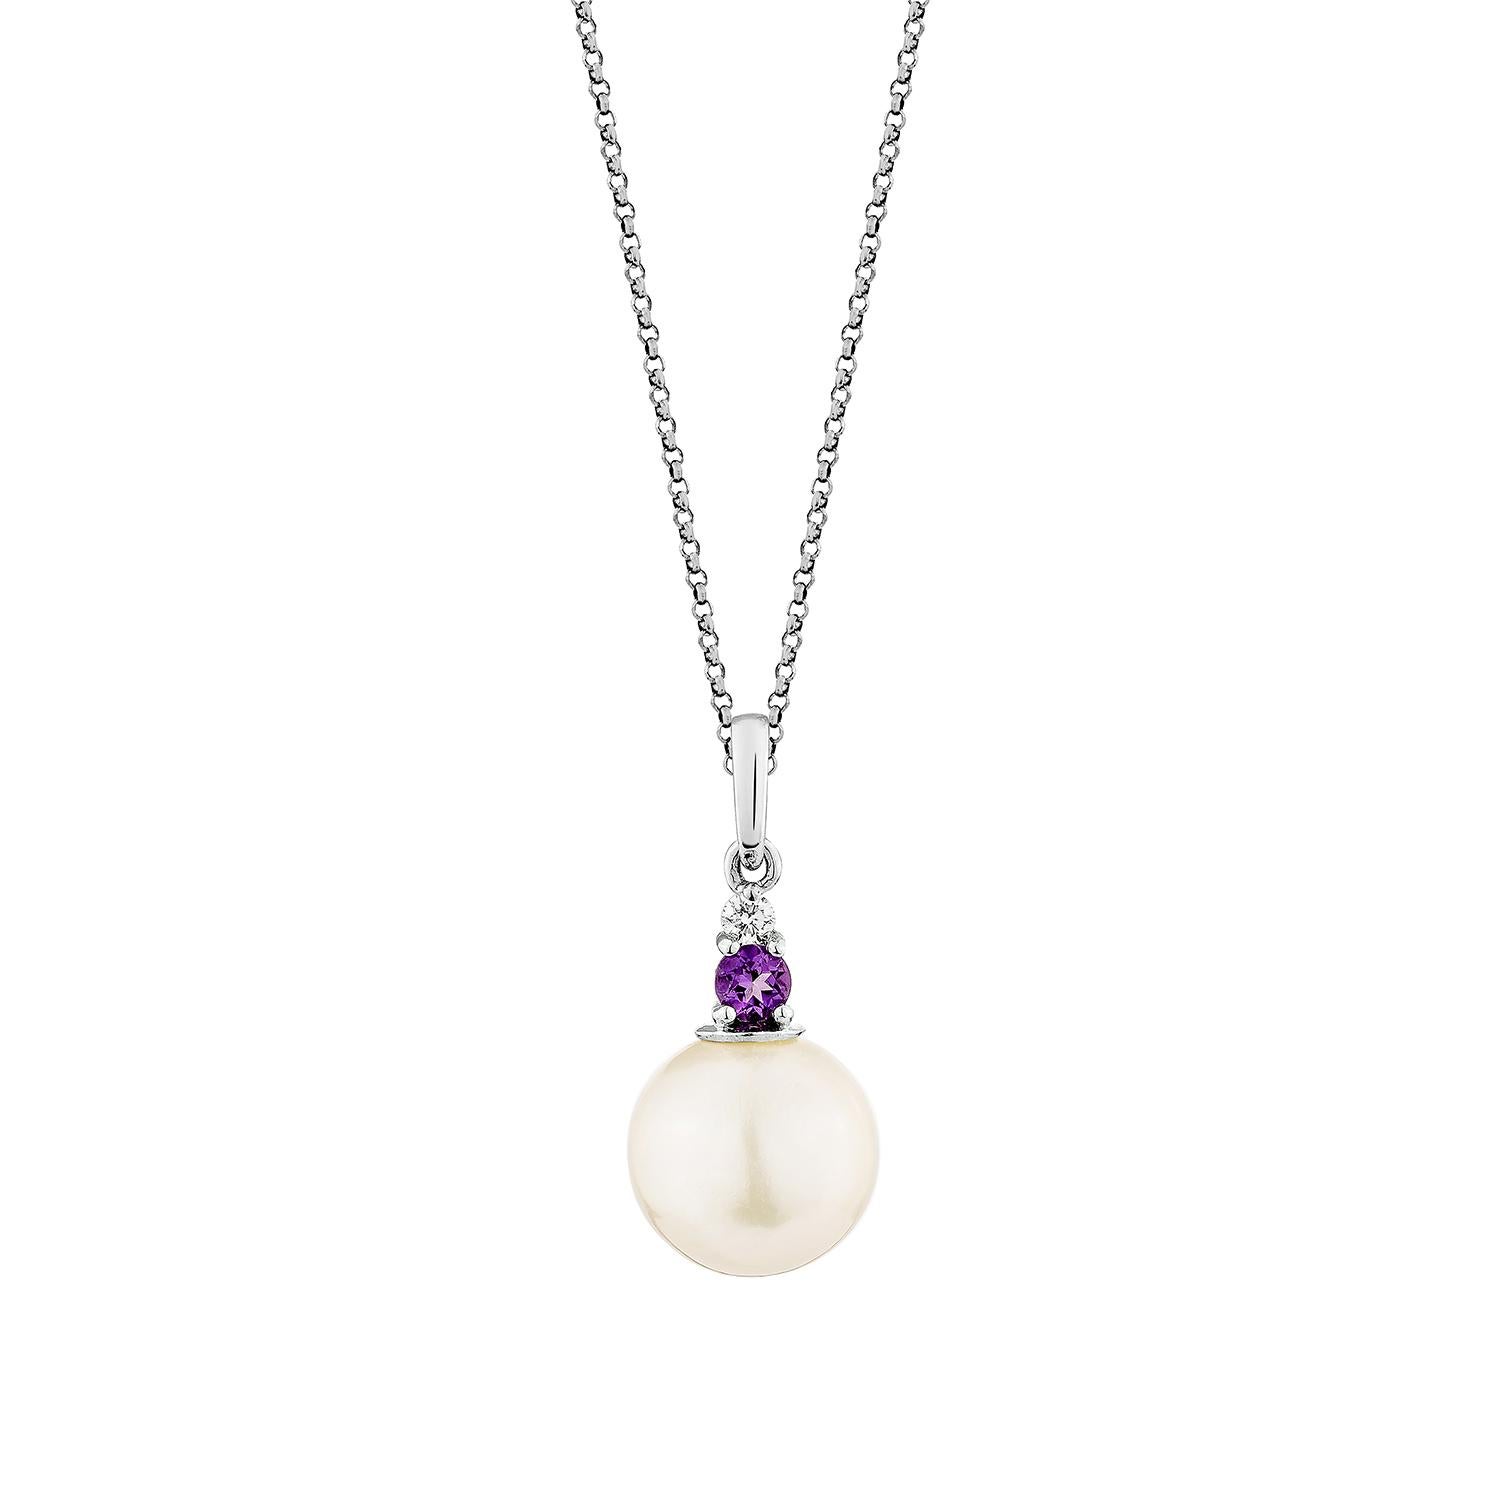 Contemporary 6.34 Carat White Pearl Pendant in 14KWG with Amethyst and White Diamond. For Sale